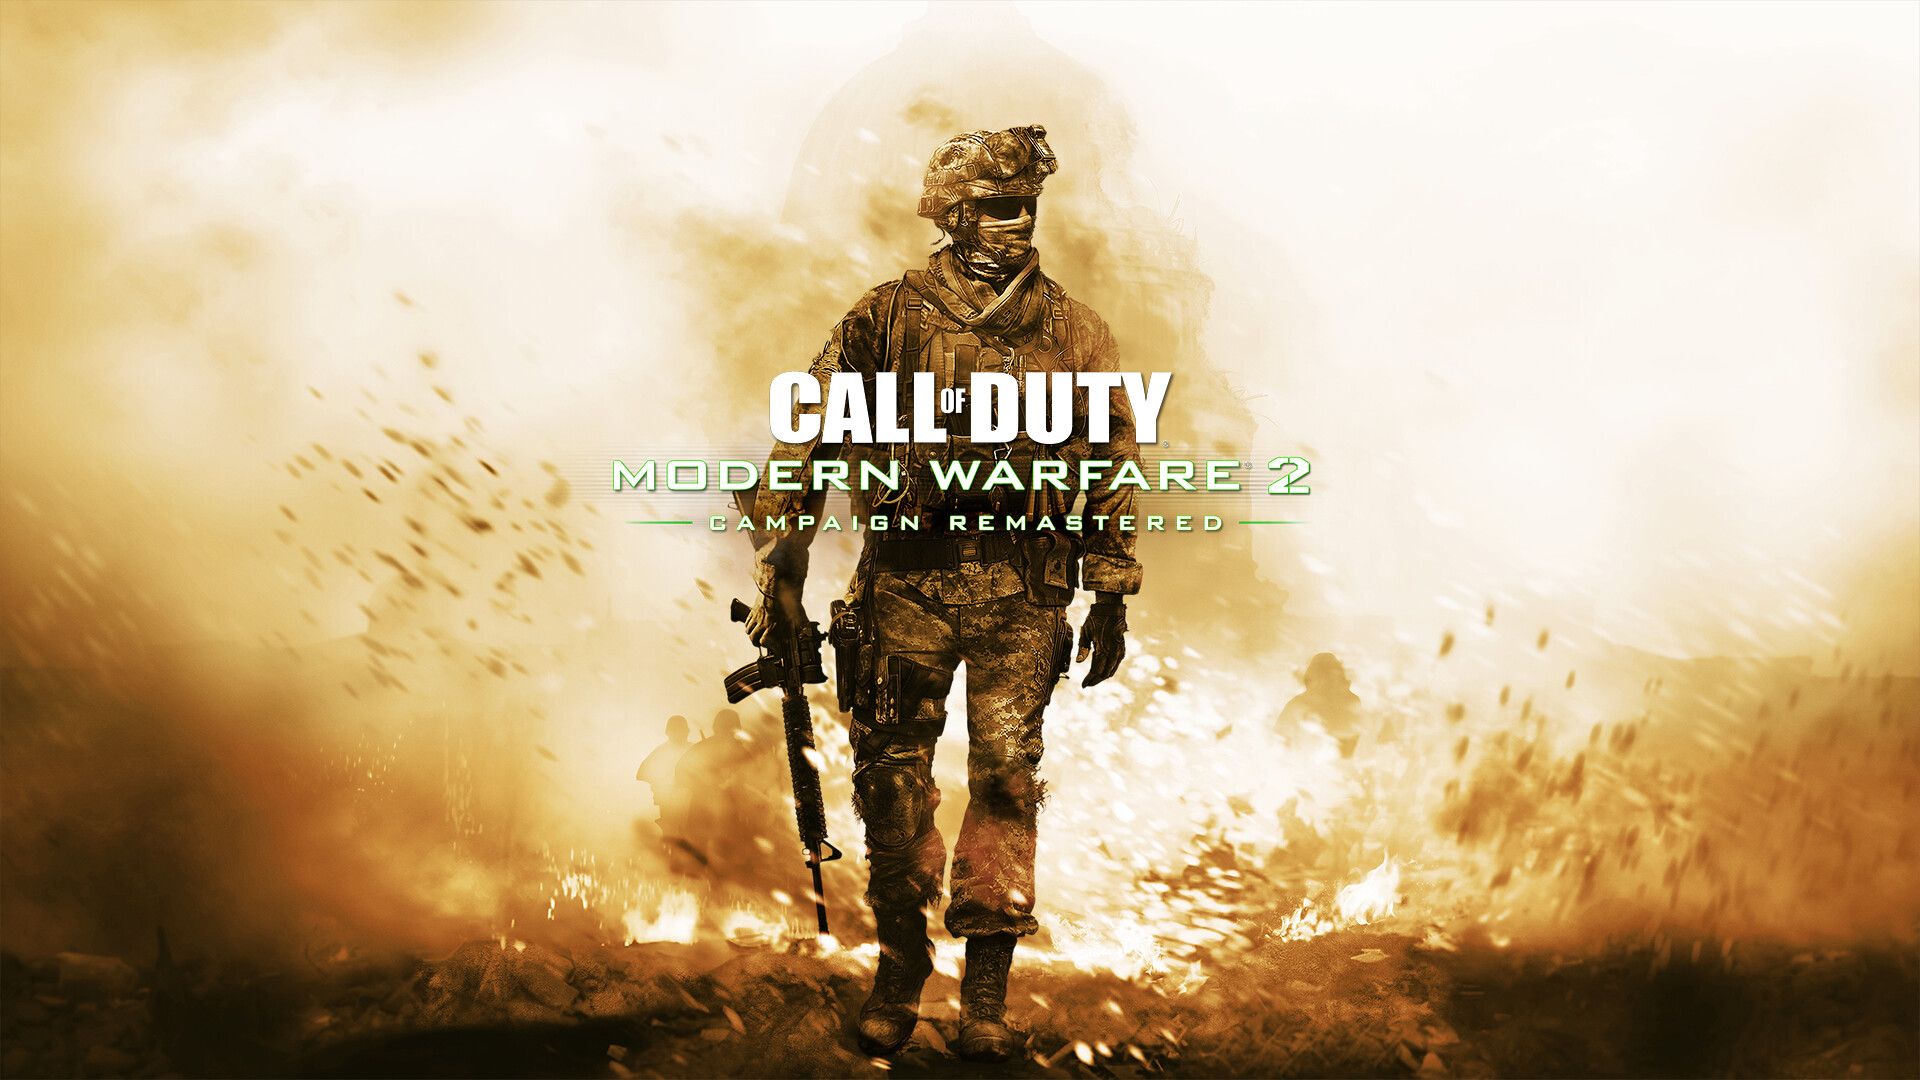 Call of Duty: Modern Warfare 2 Campaign Remastered Available Today on PS4